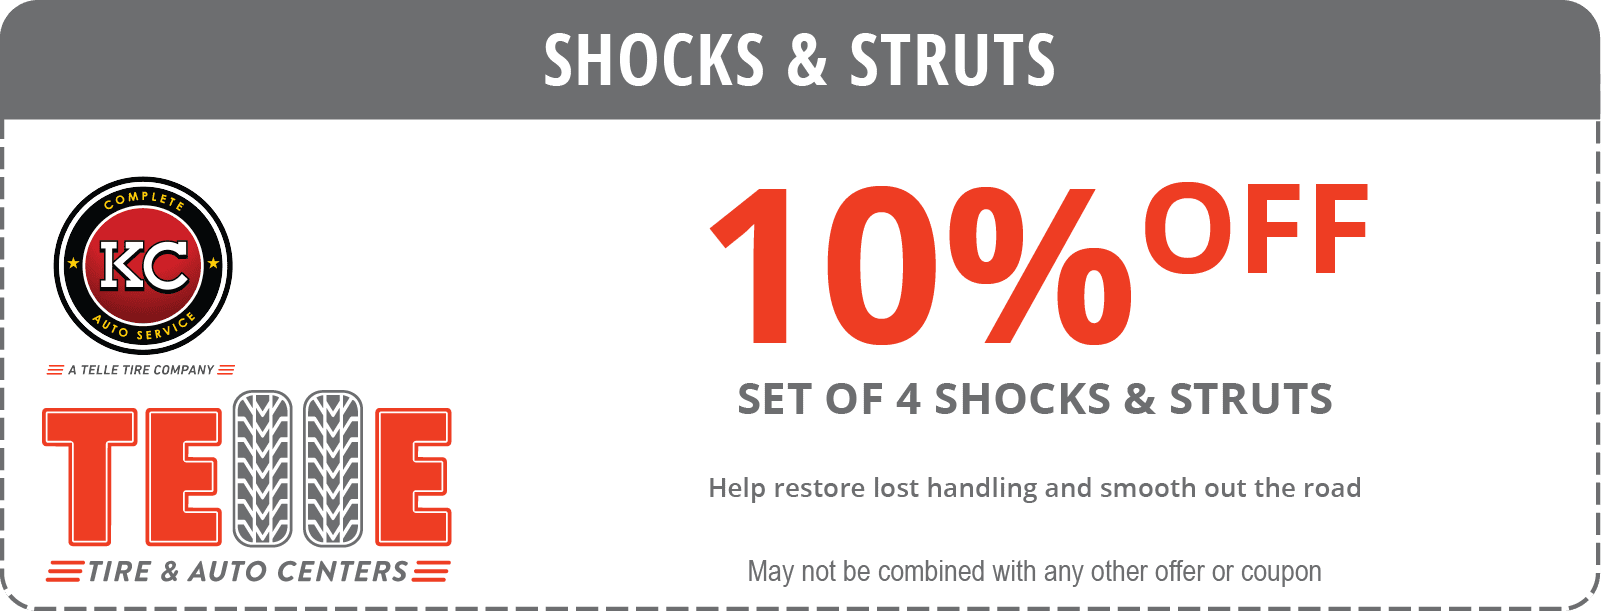 Telle Tire Shocks and Struts coupon. 10% off a set of 4 shocks and struts. Help restore lost handling and smooth out the road. May bot be combined with any other offer or coupon.